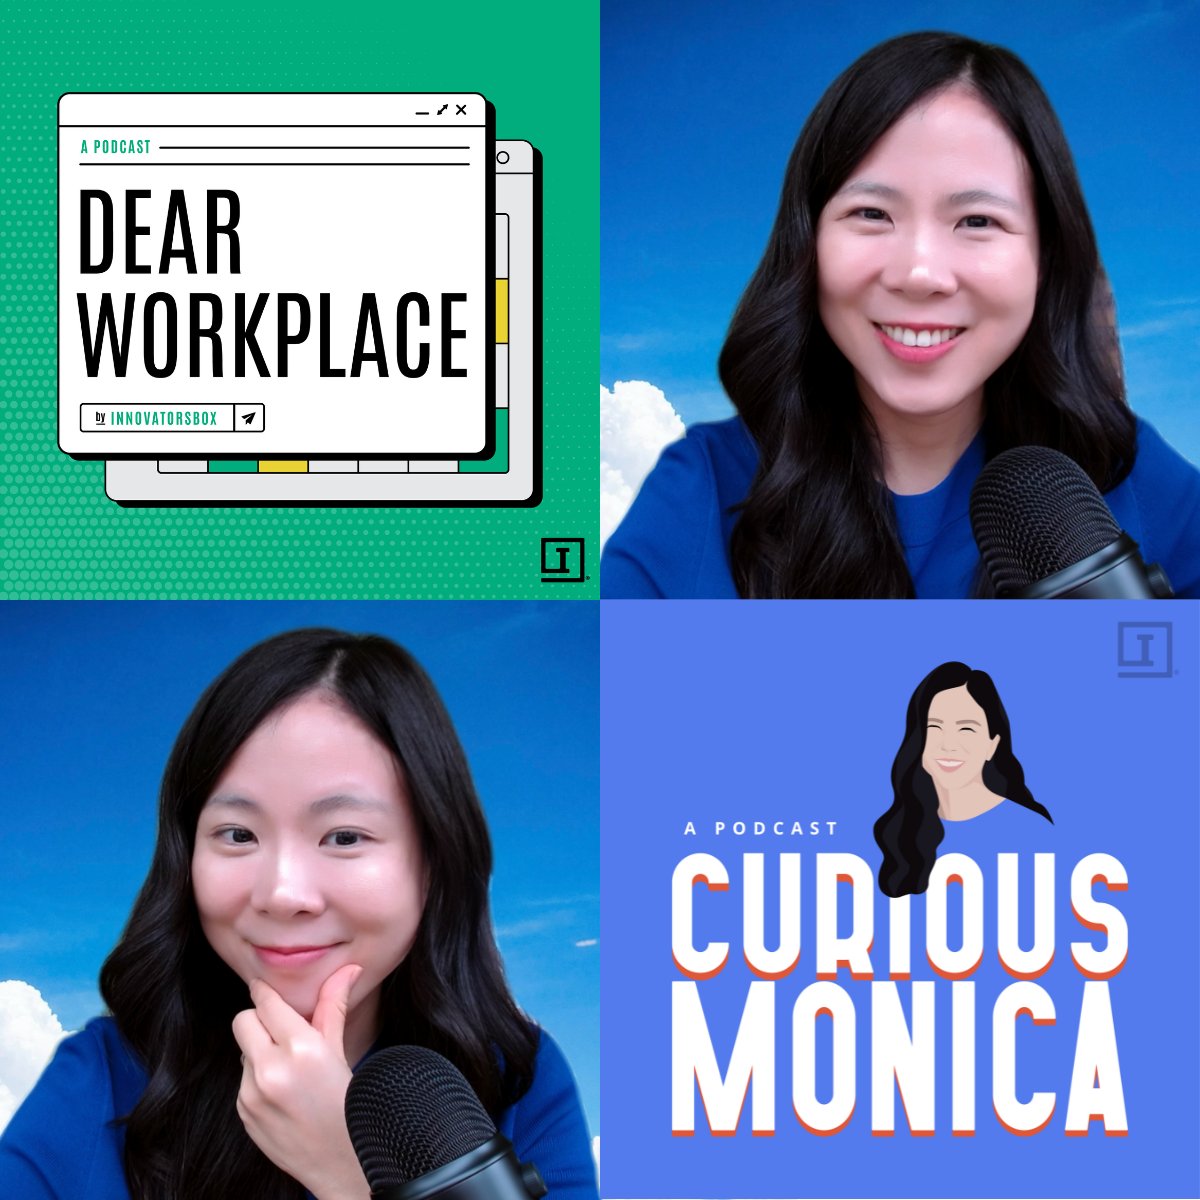 Pst...! Our award-winning podcasts #DearWorkplace and #CuriousMonica by @InnovatorsBox and @monicahkang are returning in 2024. In the meantime, let us know. What questions are you pondering? What's on your mind lately as a leader? Who should we interview? We're ready to dive in.